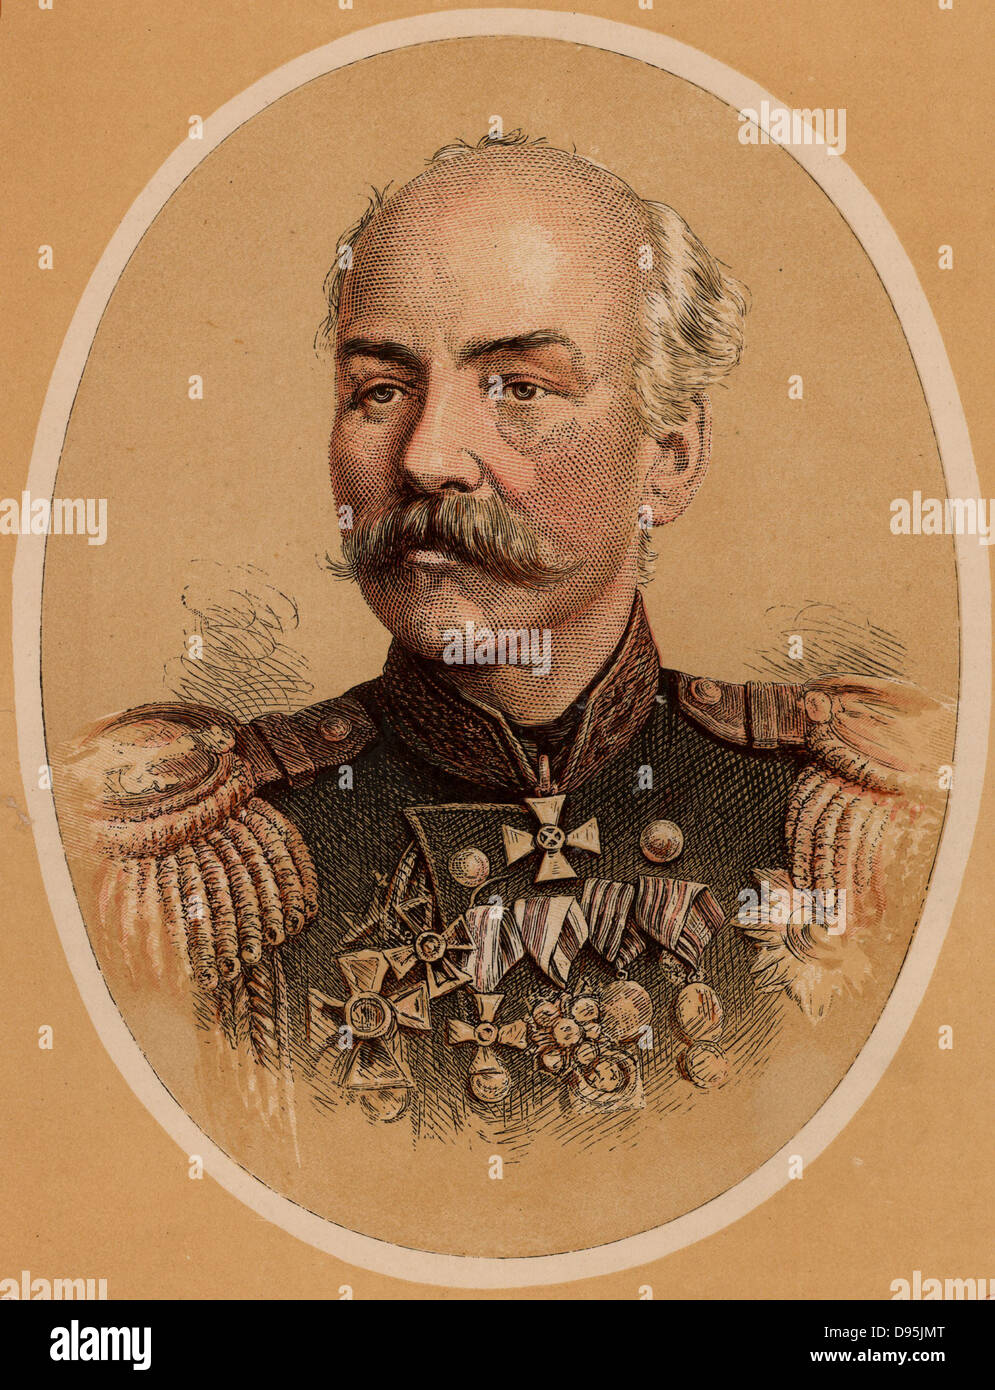 Constantine Petrovich von Kaufmann (1818-1882) Russian military engineer. Distinguished service at Kars during the Crimean War (1855); Governor of Turkestan 1867-1882. Colour-printed wood engraving. Stock Photo